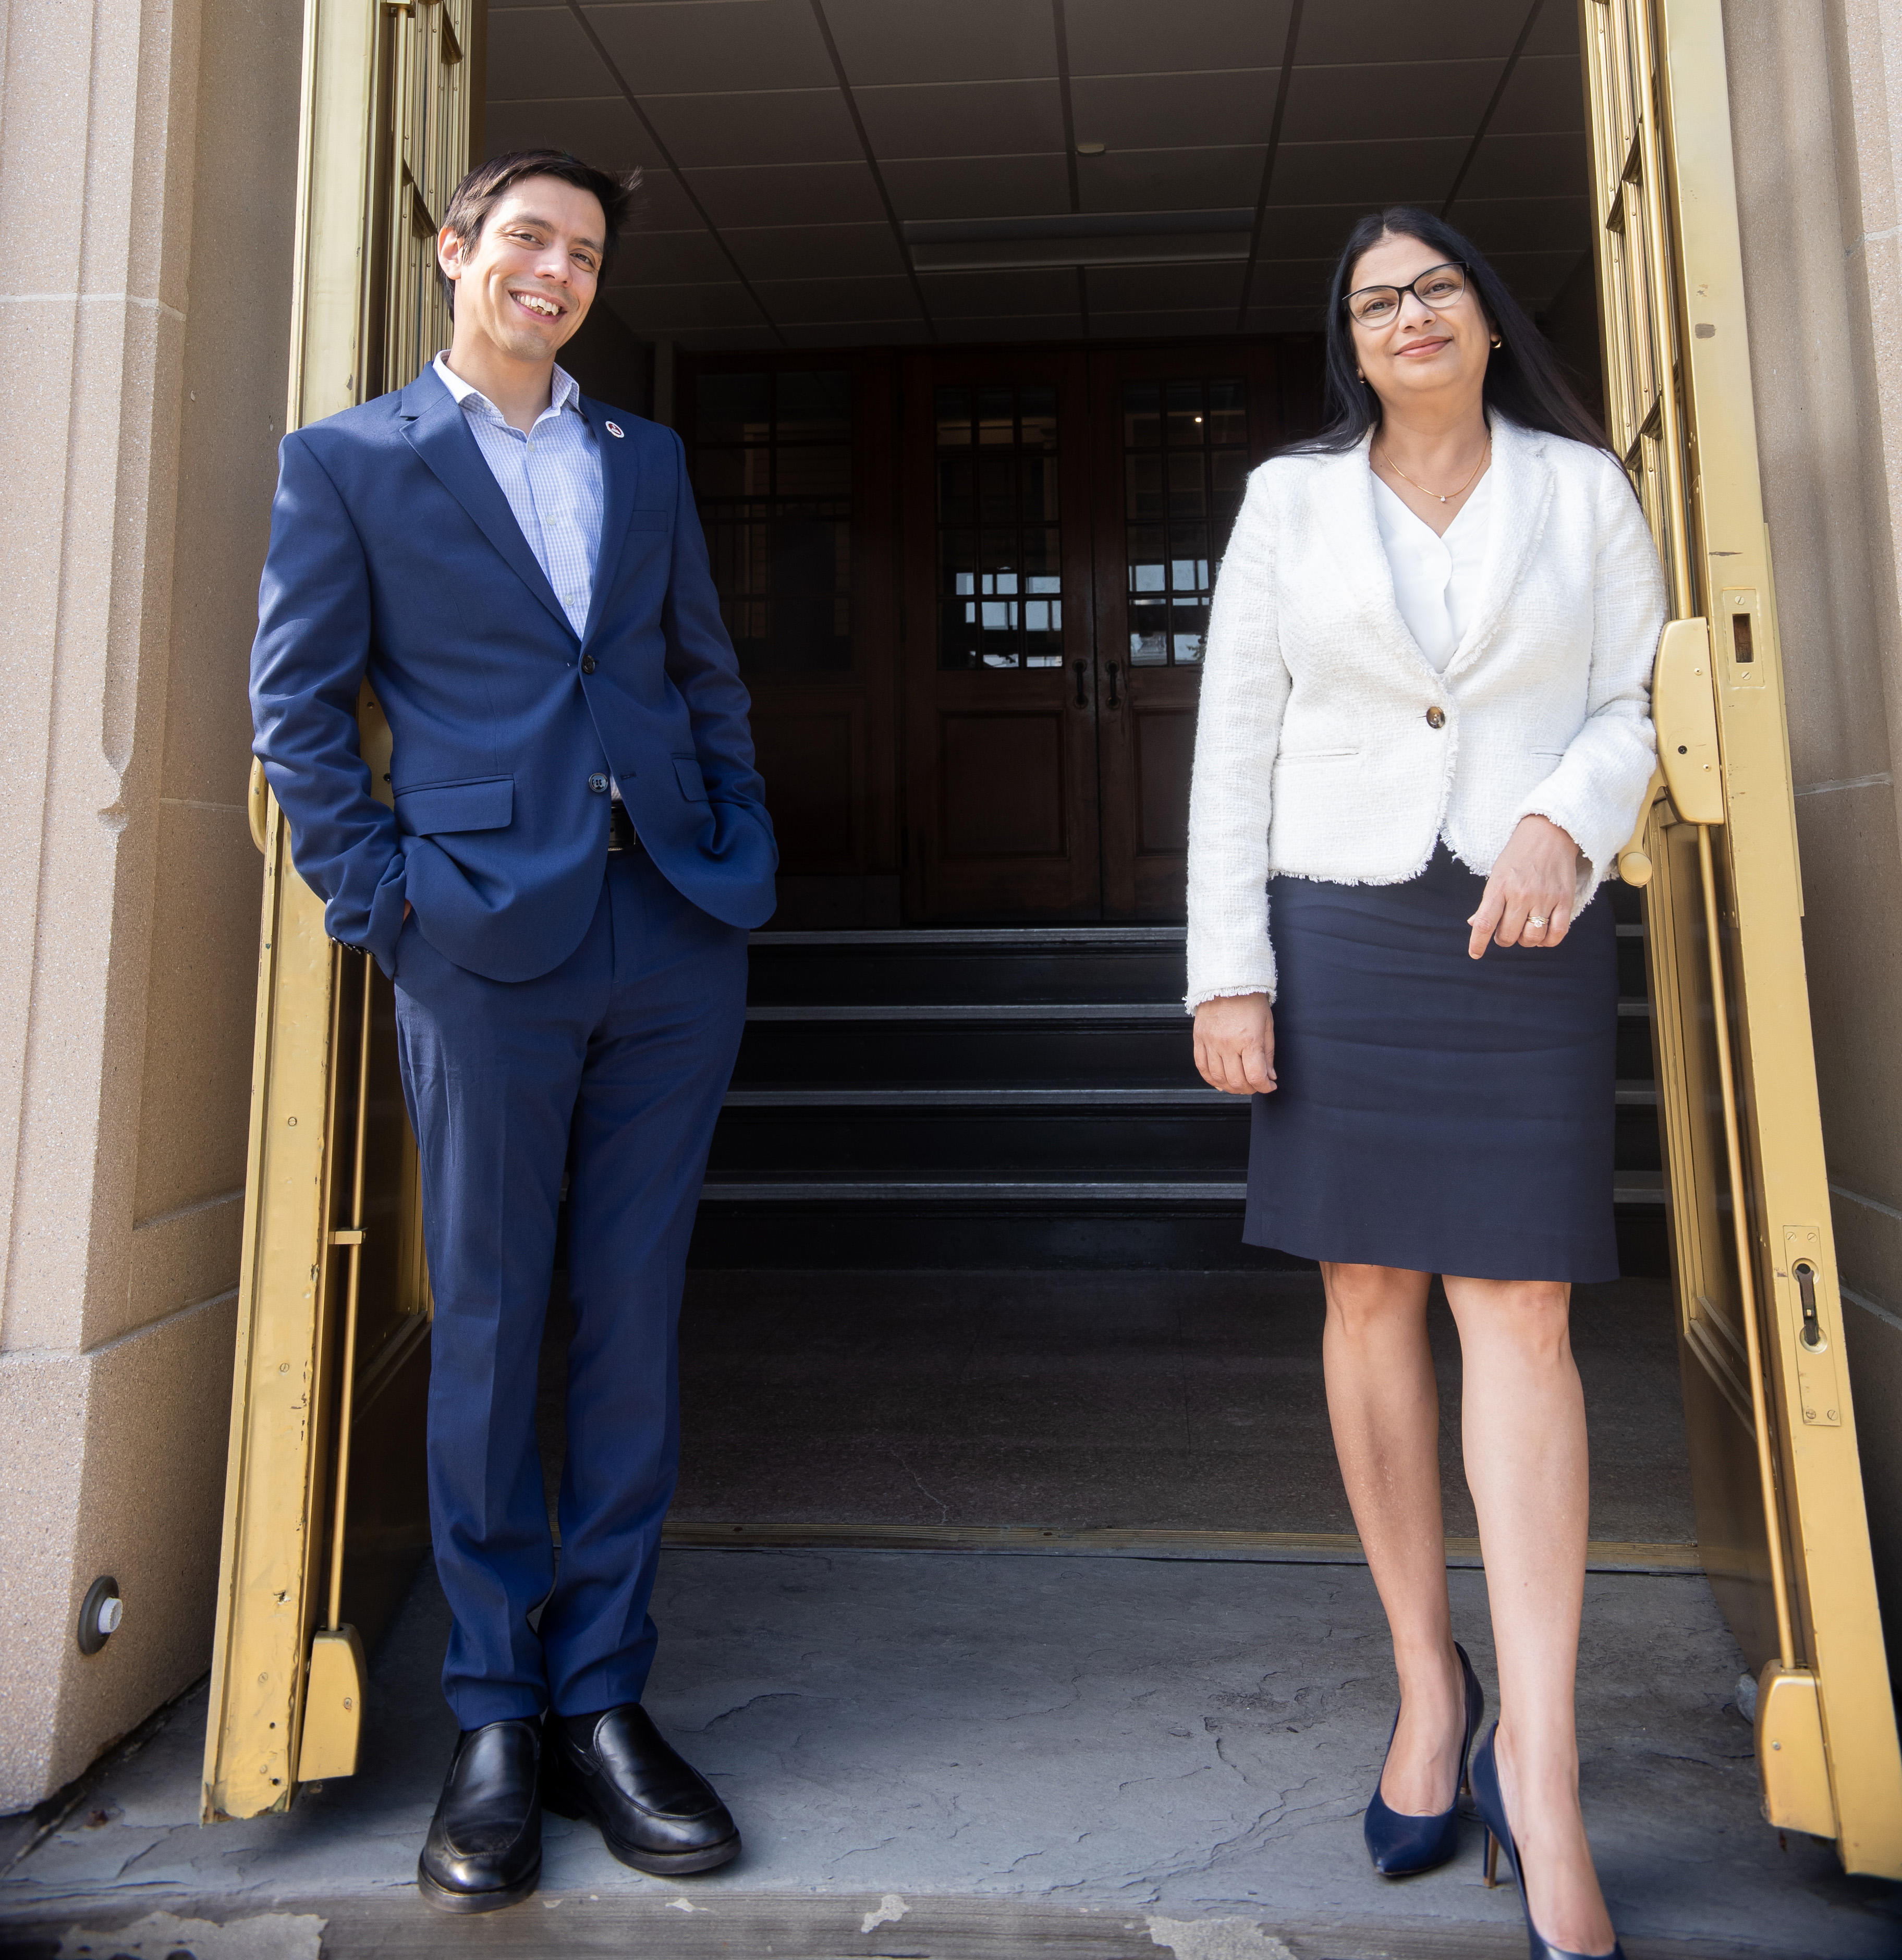 Dr. Jo Carreno and Dr. Meenakshi Malik stand outside of the O'Brien building on campus. 